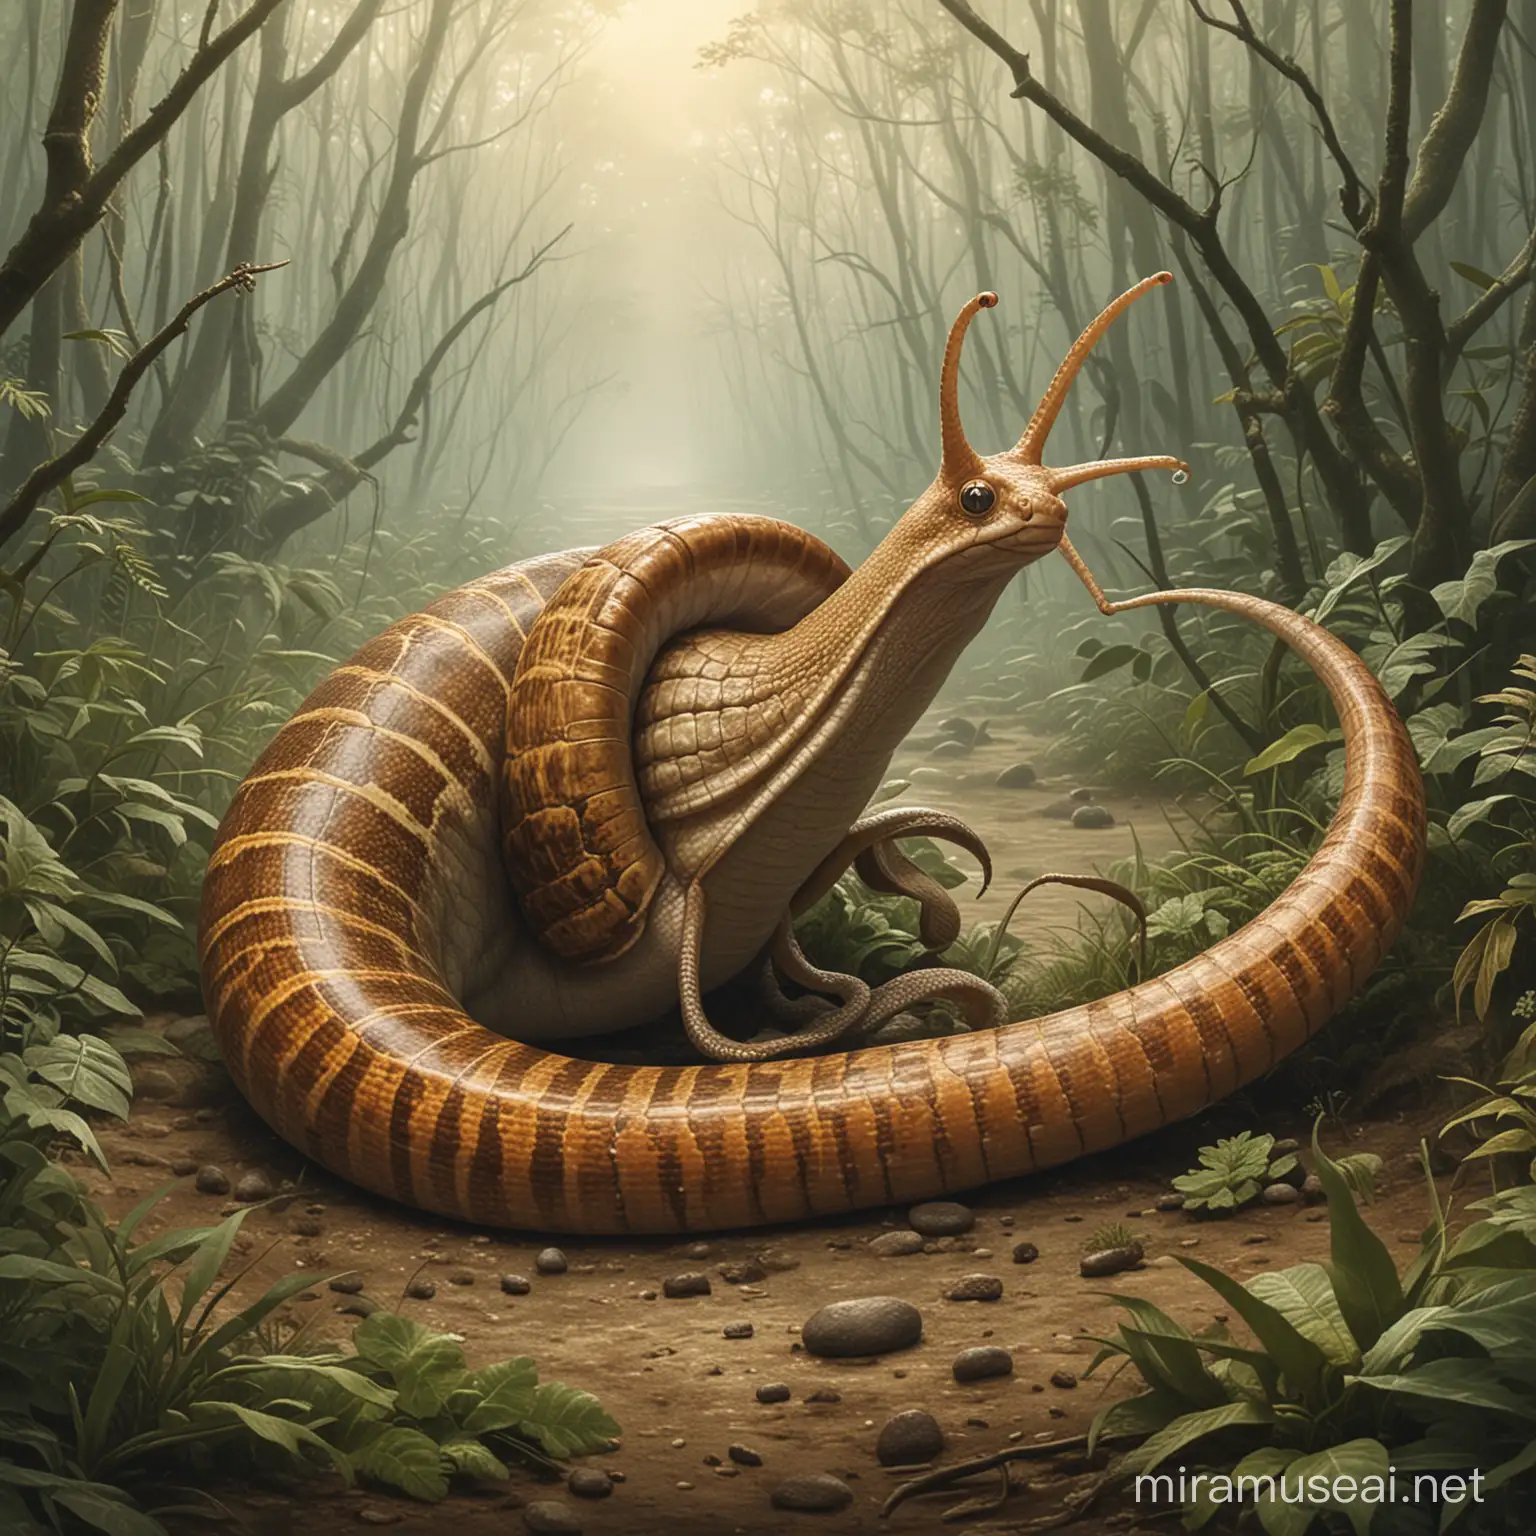 Enigmatic Creature Snaketailed Snail in Story Illustration